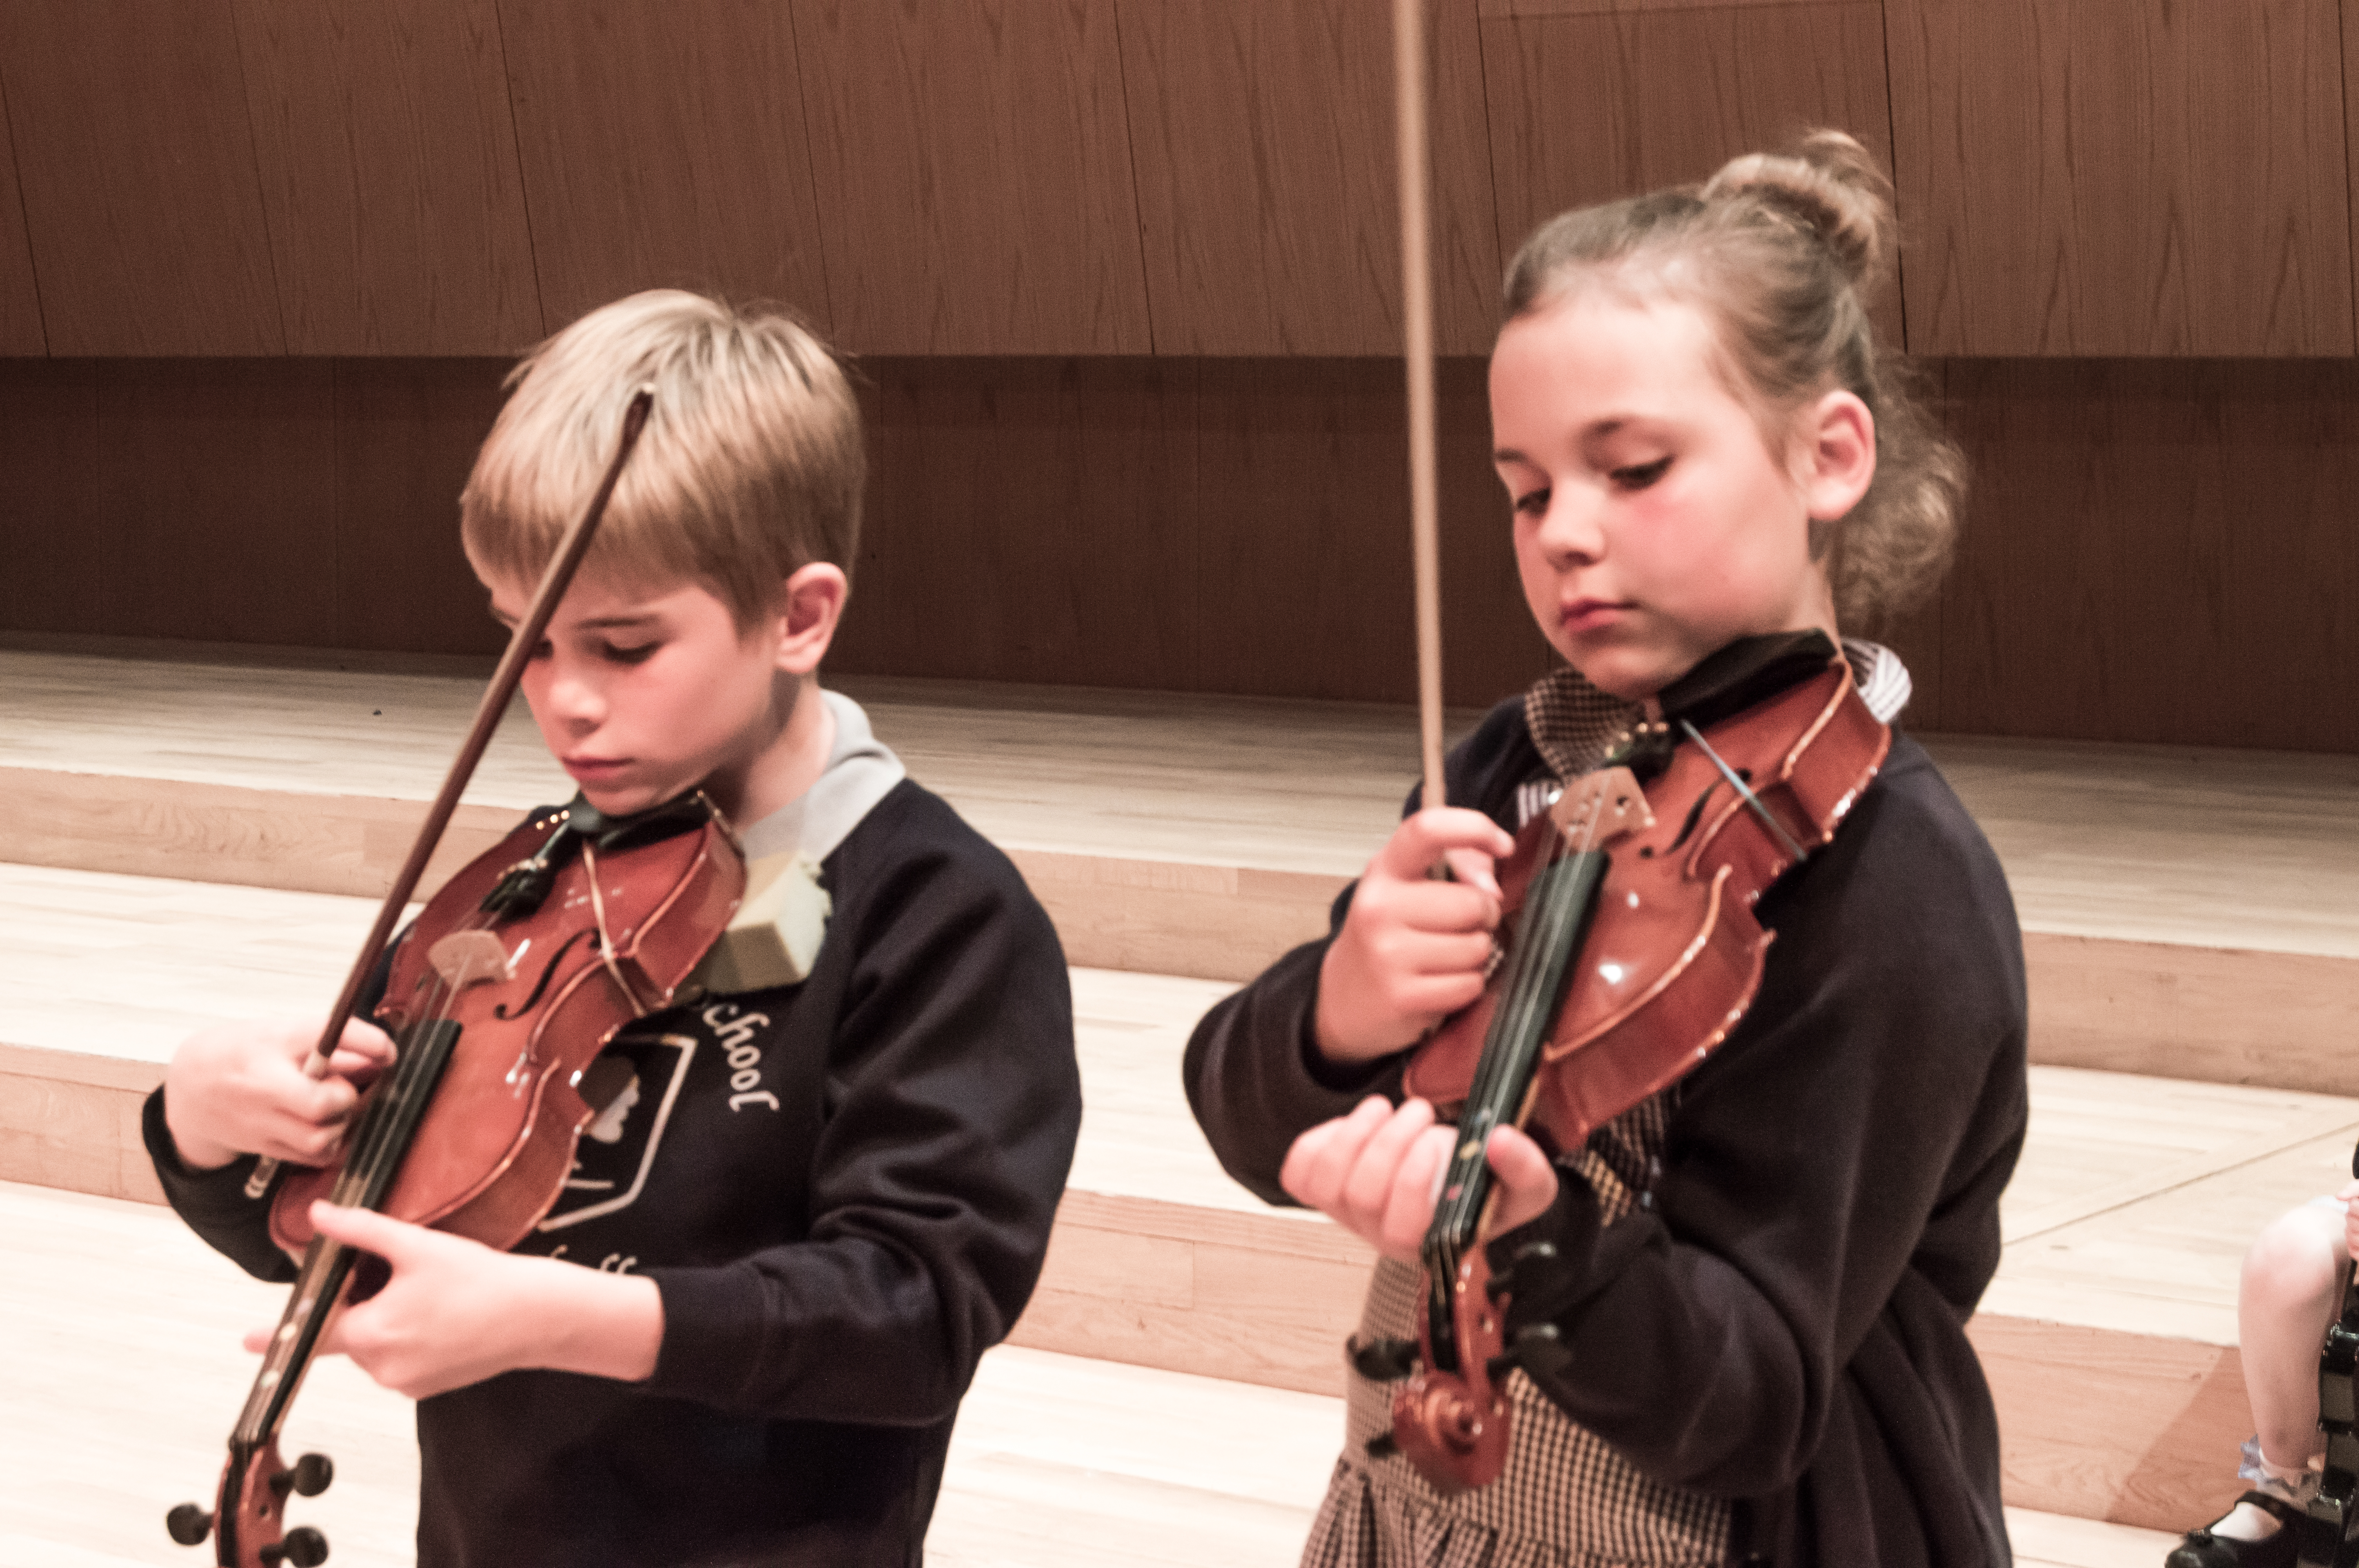 Young school boy and girl learning to play the violin with concentration.